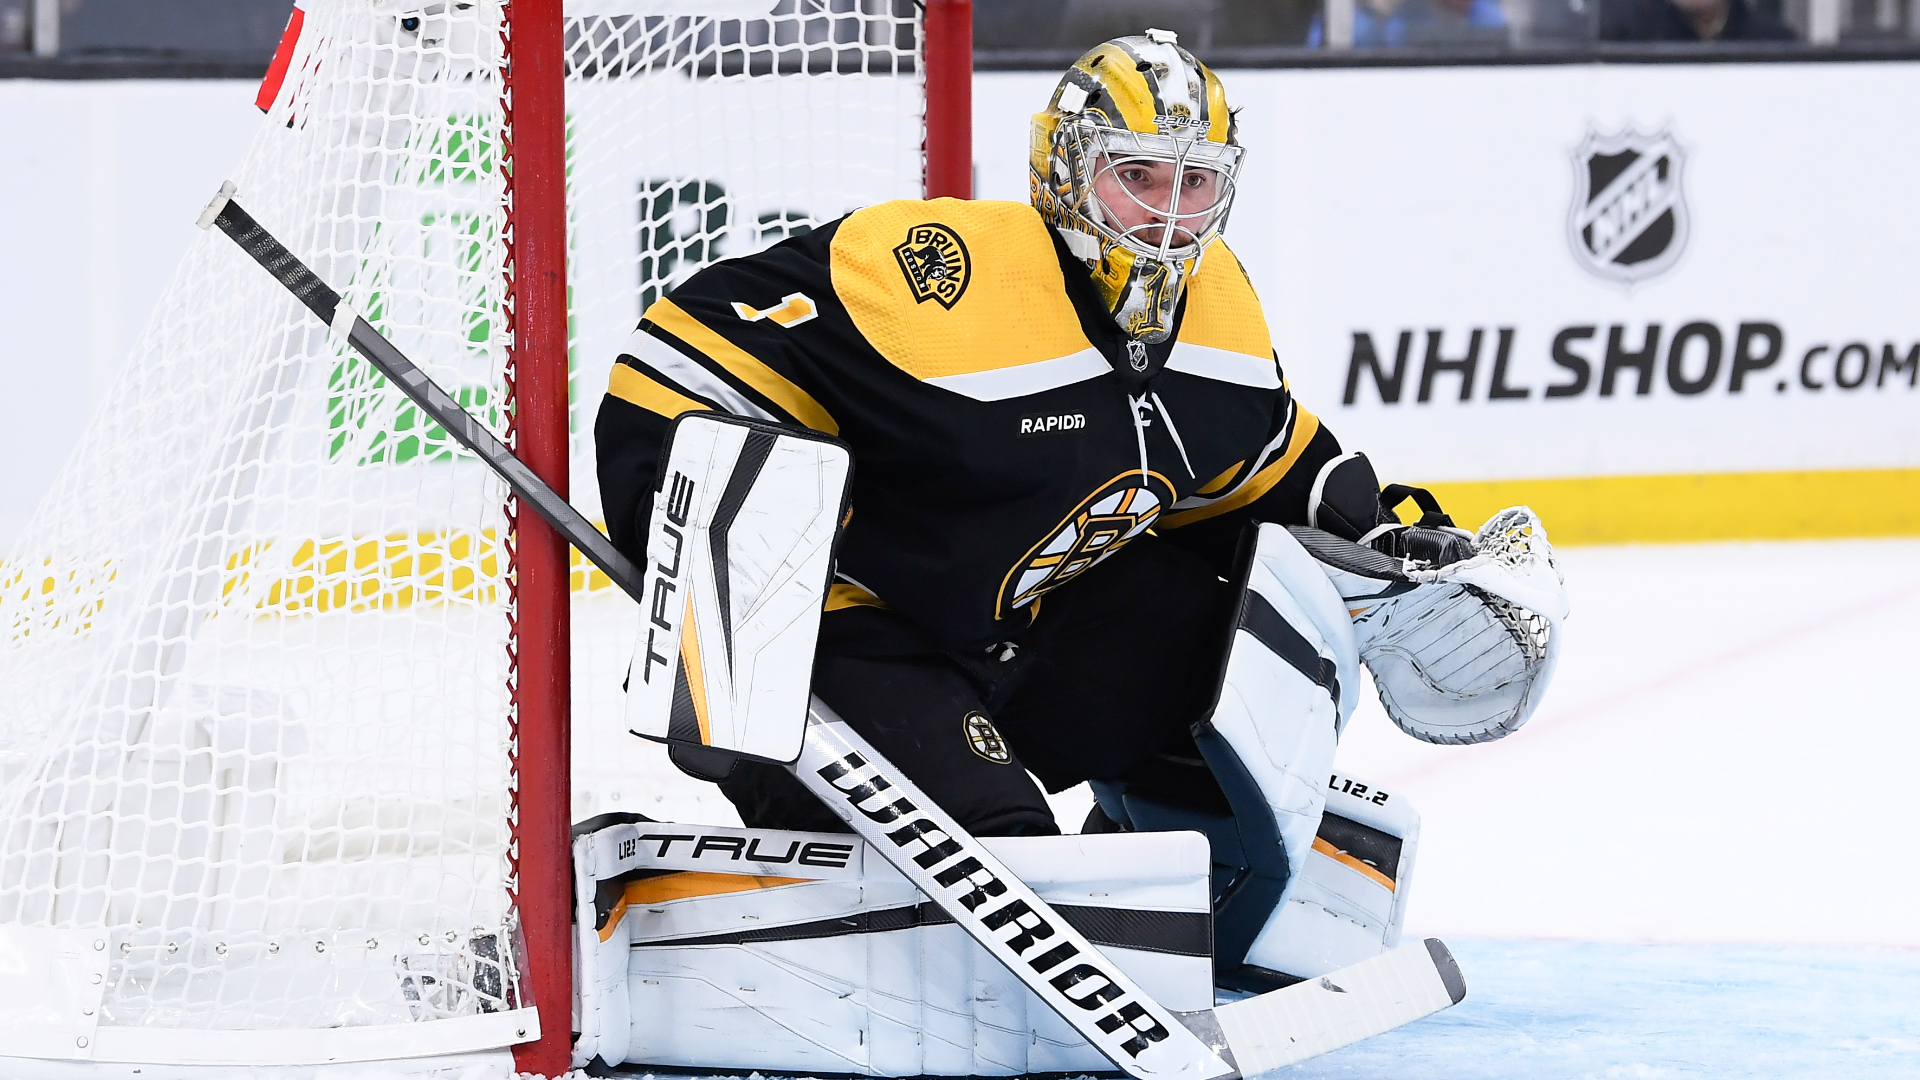 Bruins netminder Jeremy Swayman receives 'star' honors from NHL